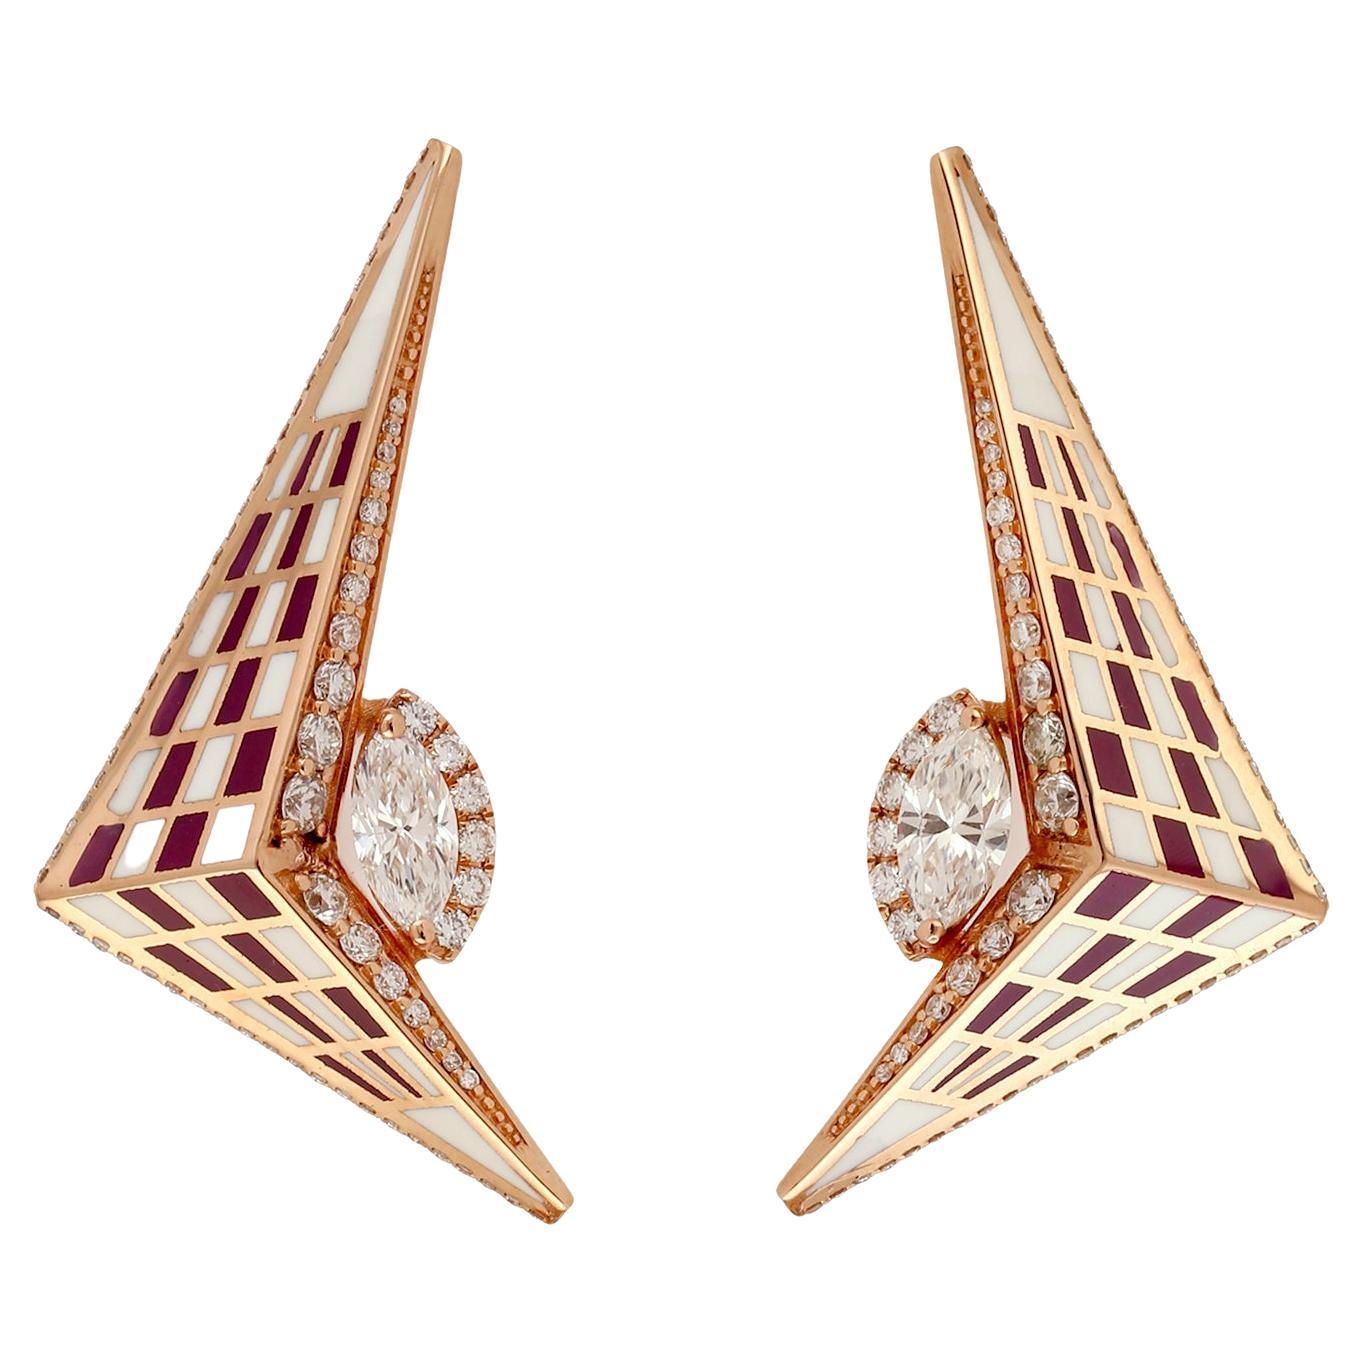 Three Dimensional Arrow Shaped Yellow Gold Earring with Center Marquise Diamond For Sale